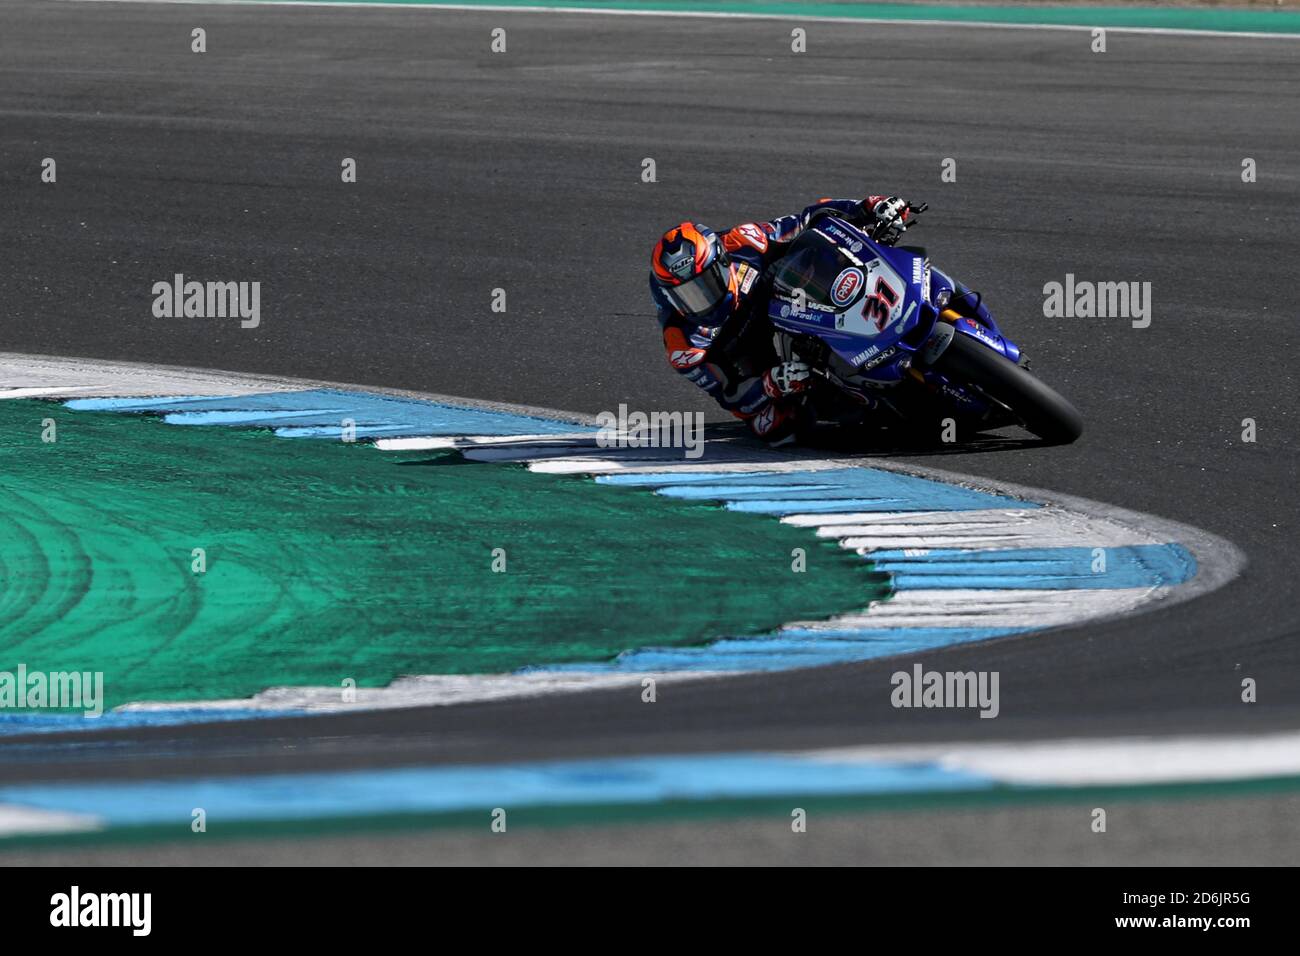 Cascais. 17th Oct, 2020. The United States' Garrett Gerloff of Grt Yamaha Worldsbk Junior Team rides during the FIM Superbike World Championship Estoril Round Race 1 at the Circuito Estoril in Cascais, Portugal on October 17, 2020. Credit: Pedro Fiuza/Xinhua/Alamy Live News Stock Photo